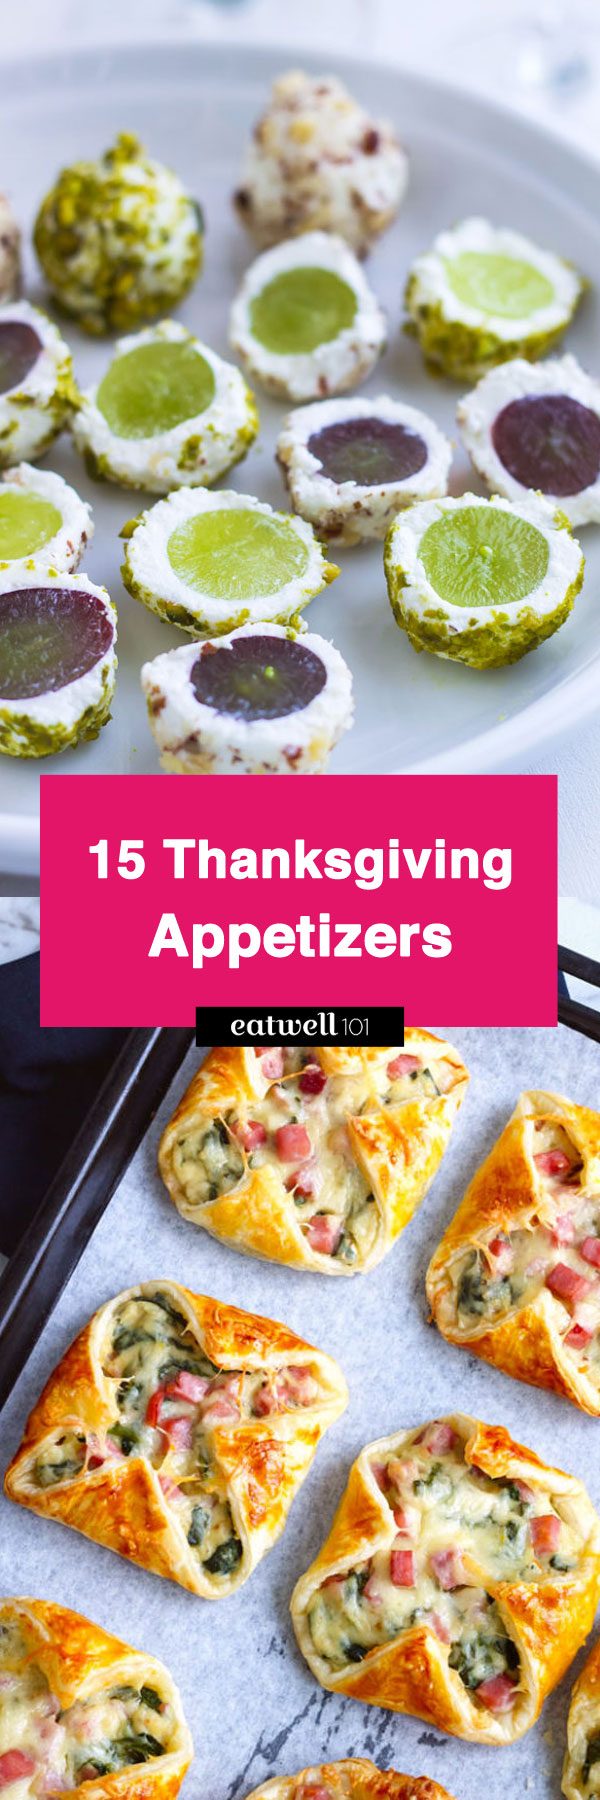 Thanksgiving Appetizers: 15 Thanksgiving Appetizer Recipes That Don’t ...